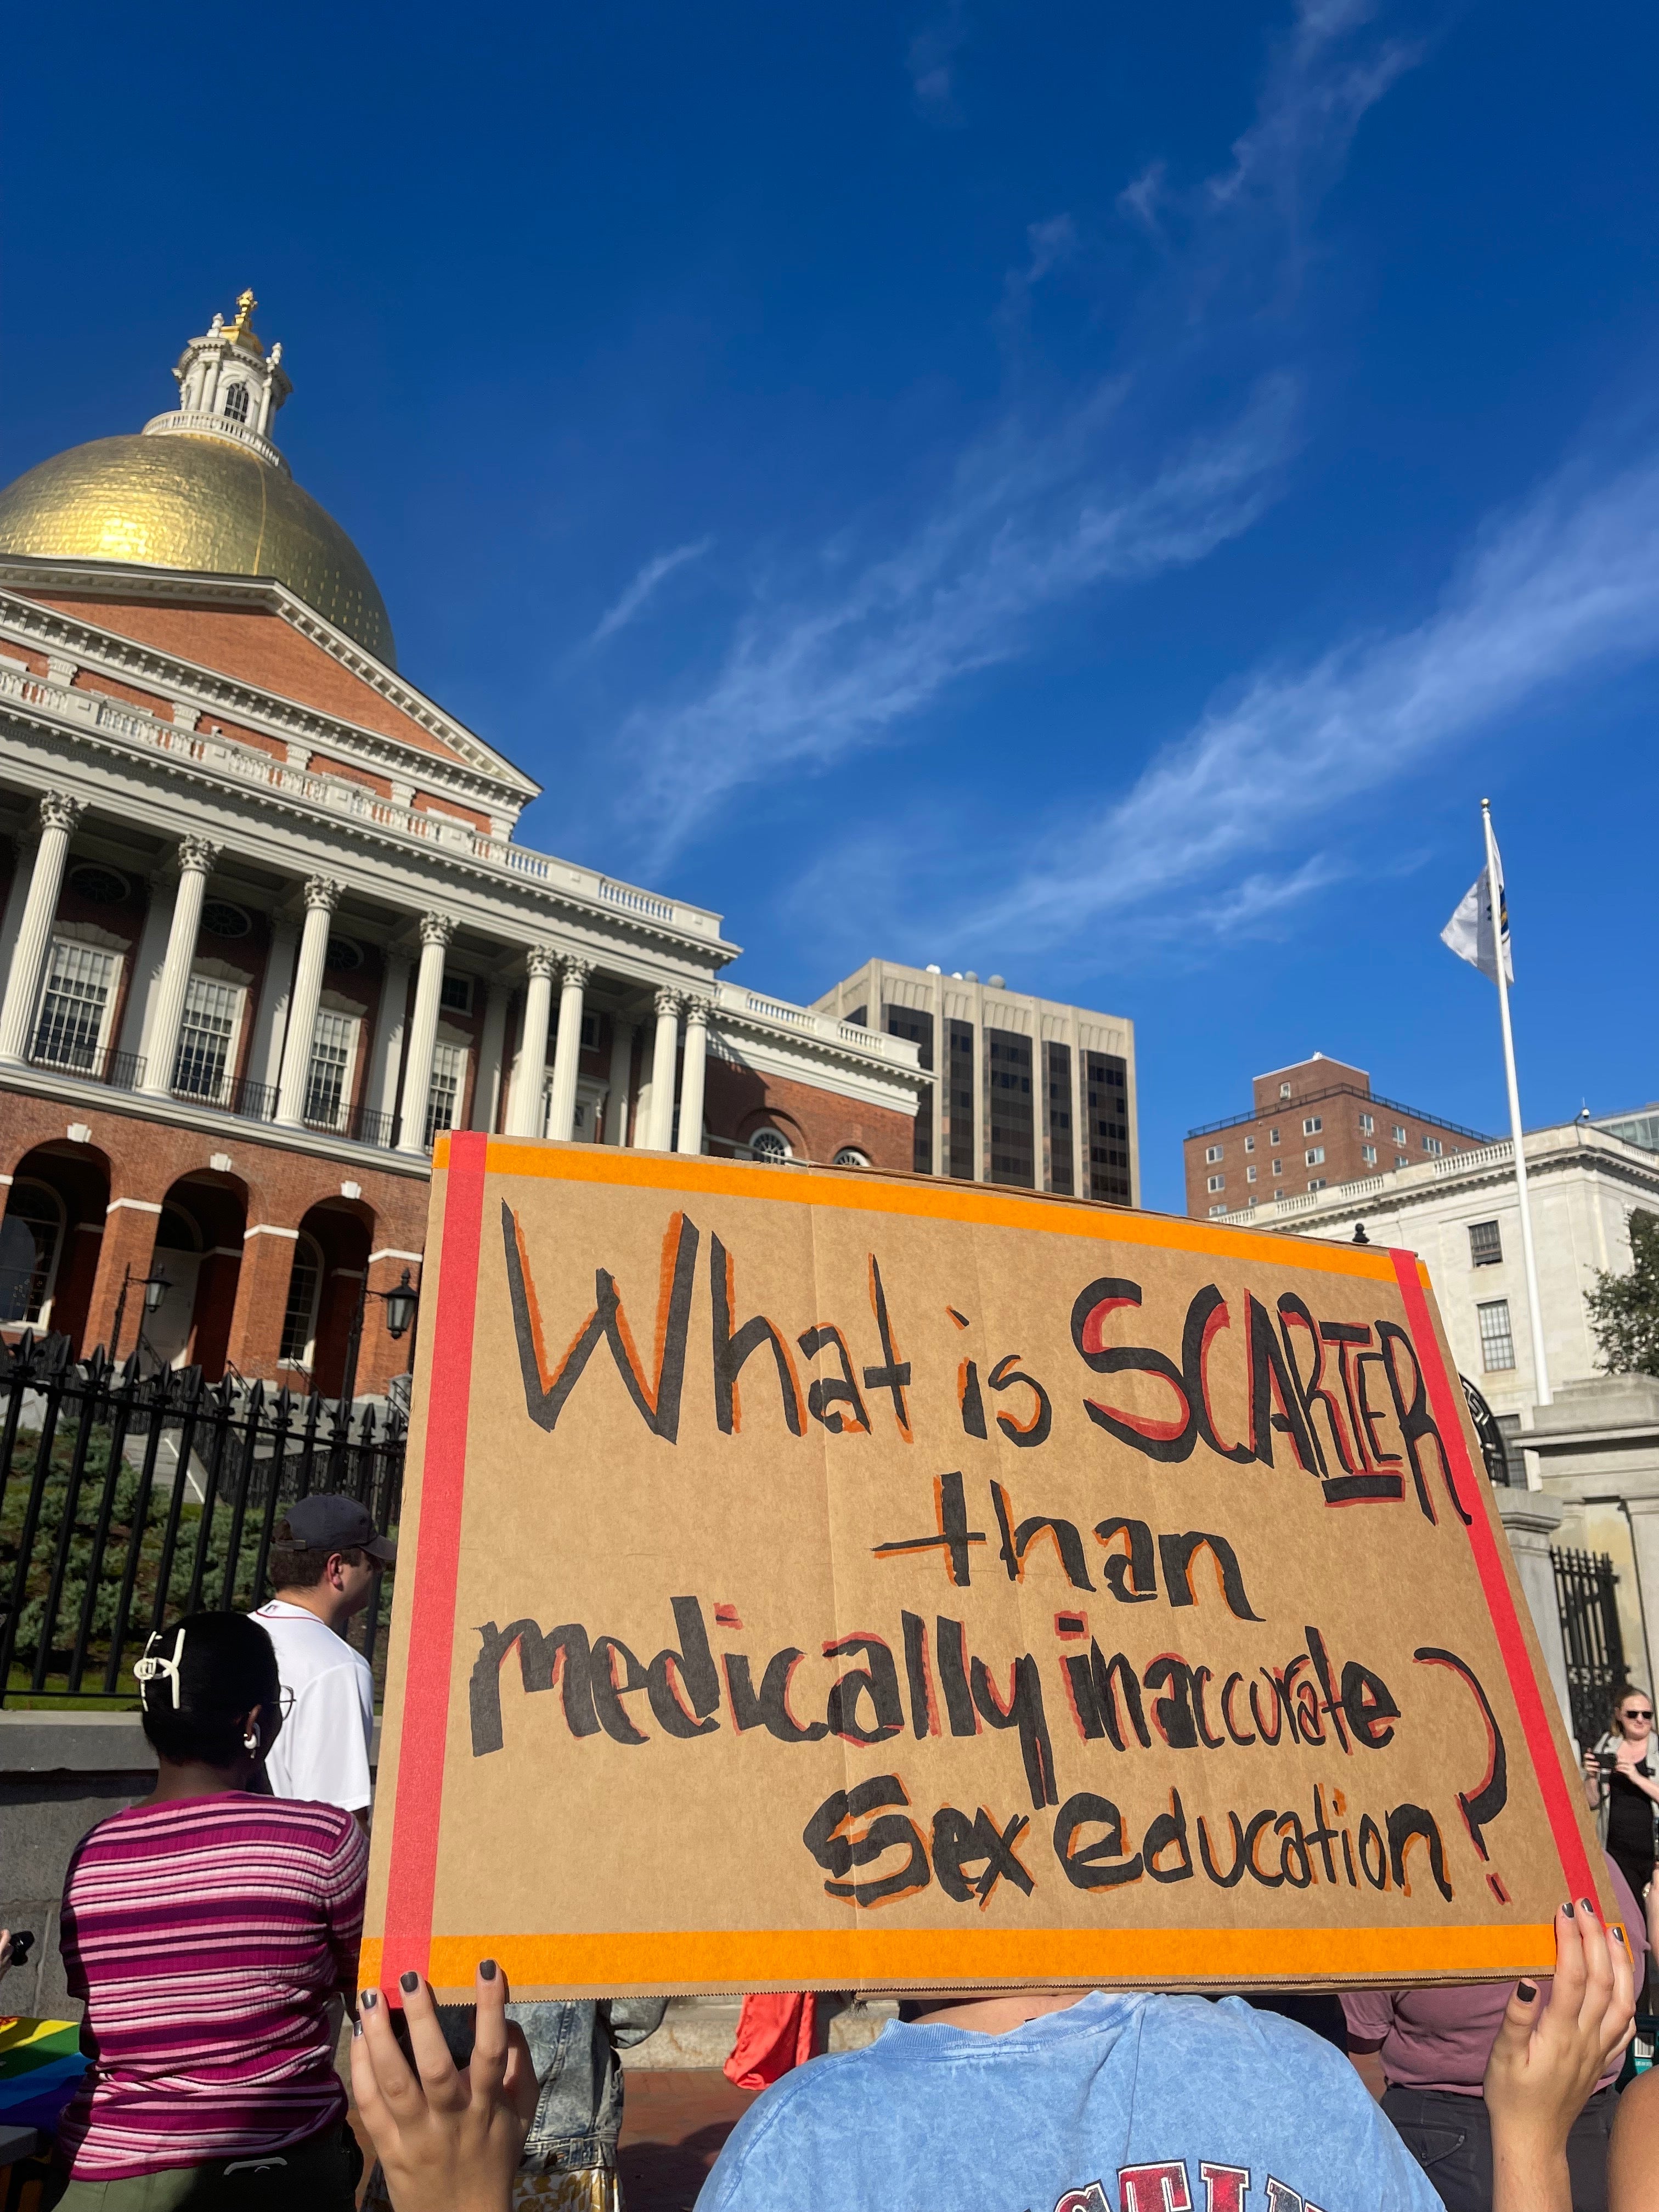 a sign that says "What is scarier than medically inaccurate sex education"